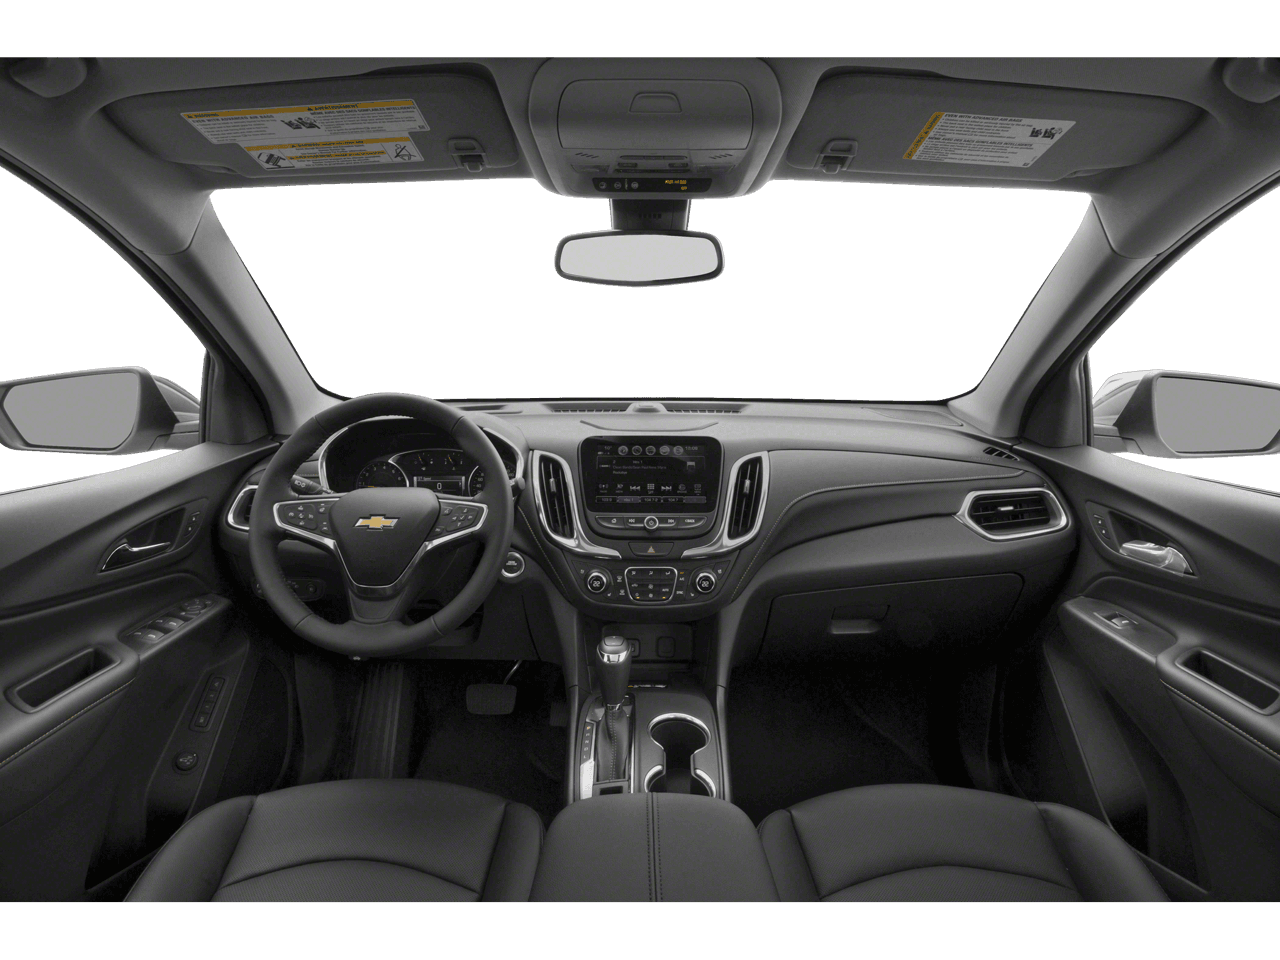 2021 Chevrolet Equinox Photo in Wooster, OH 44691